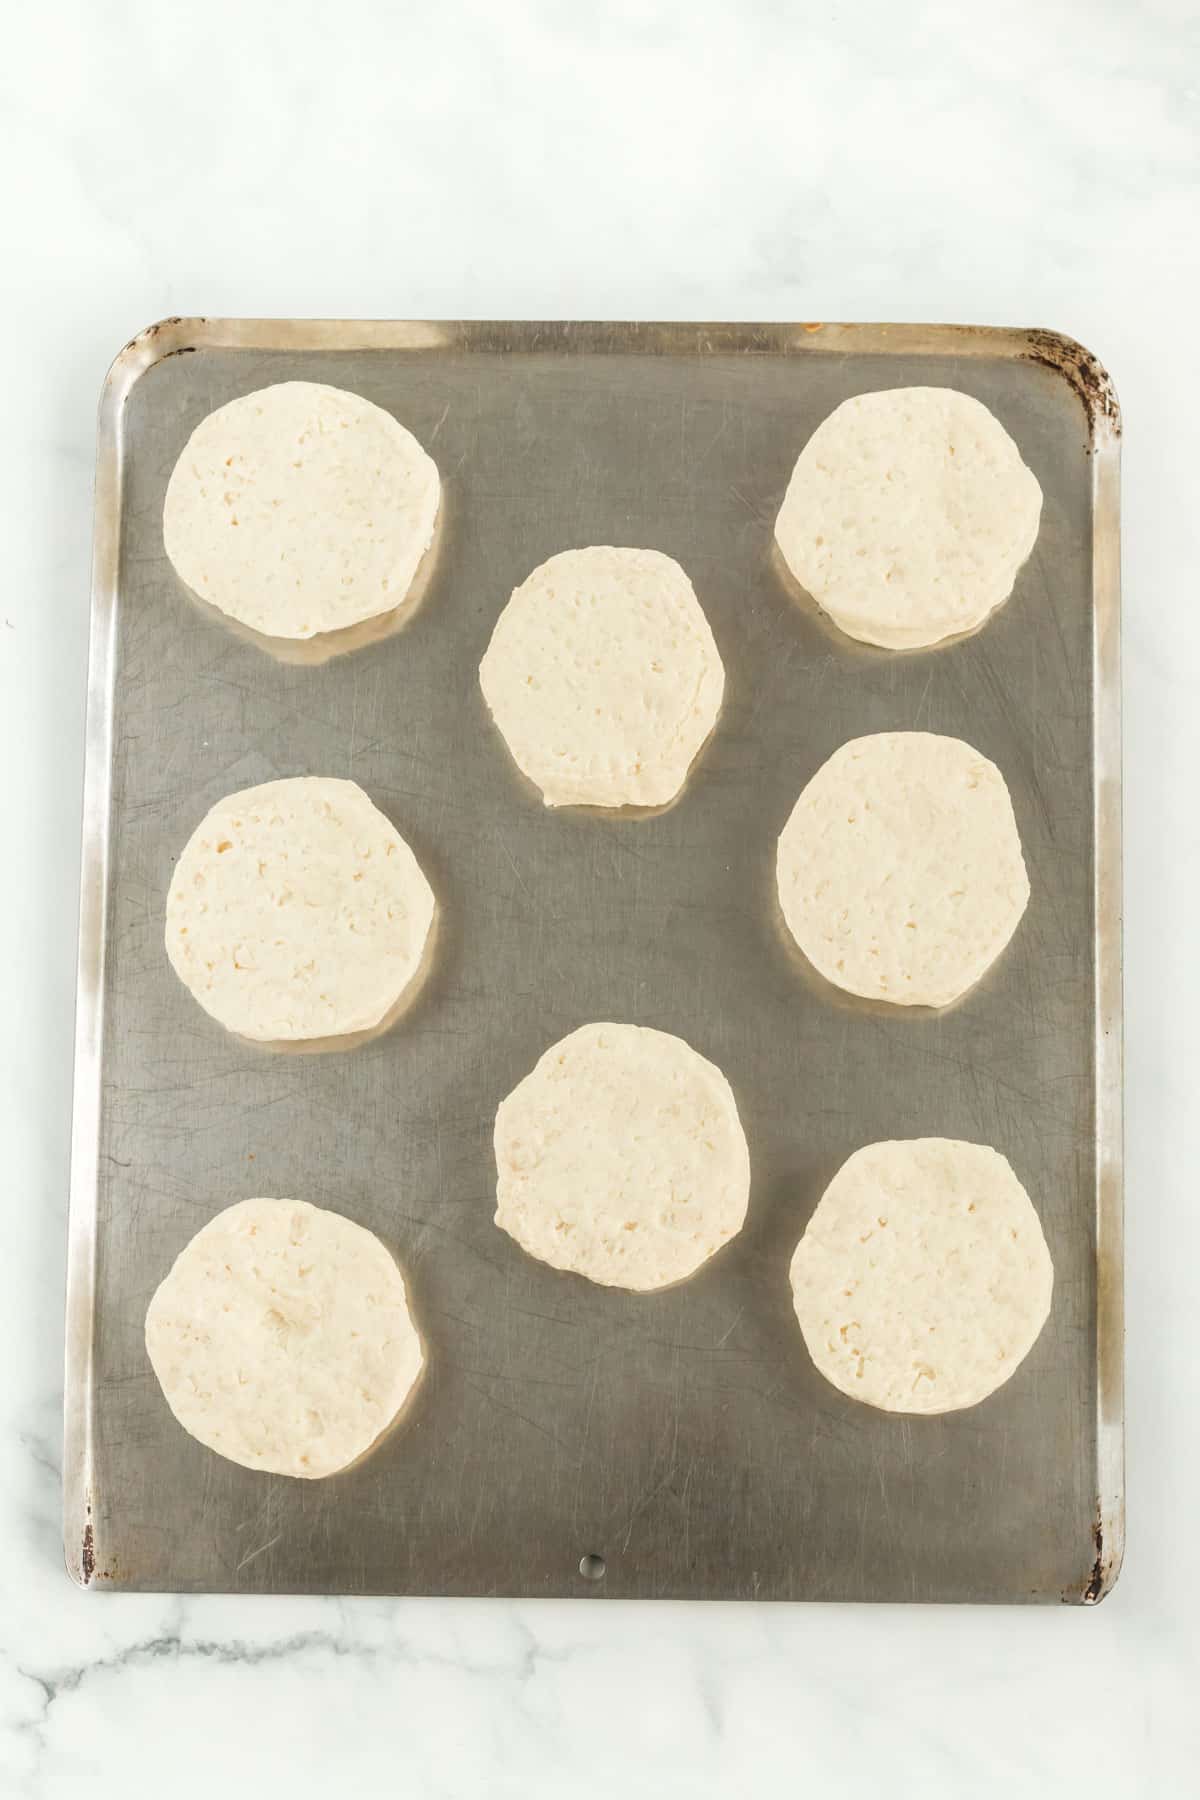 biscuits on a sheet pan